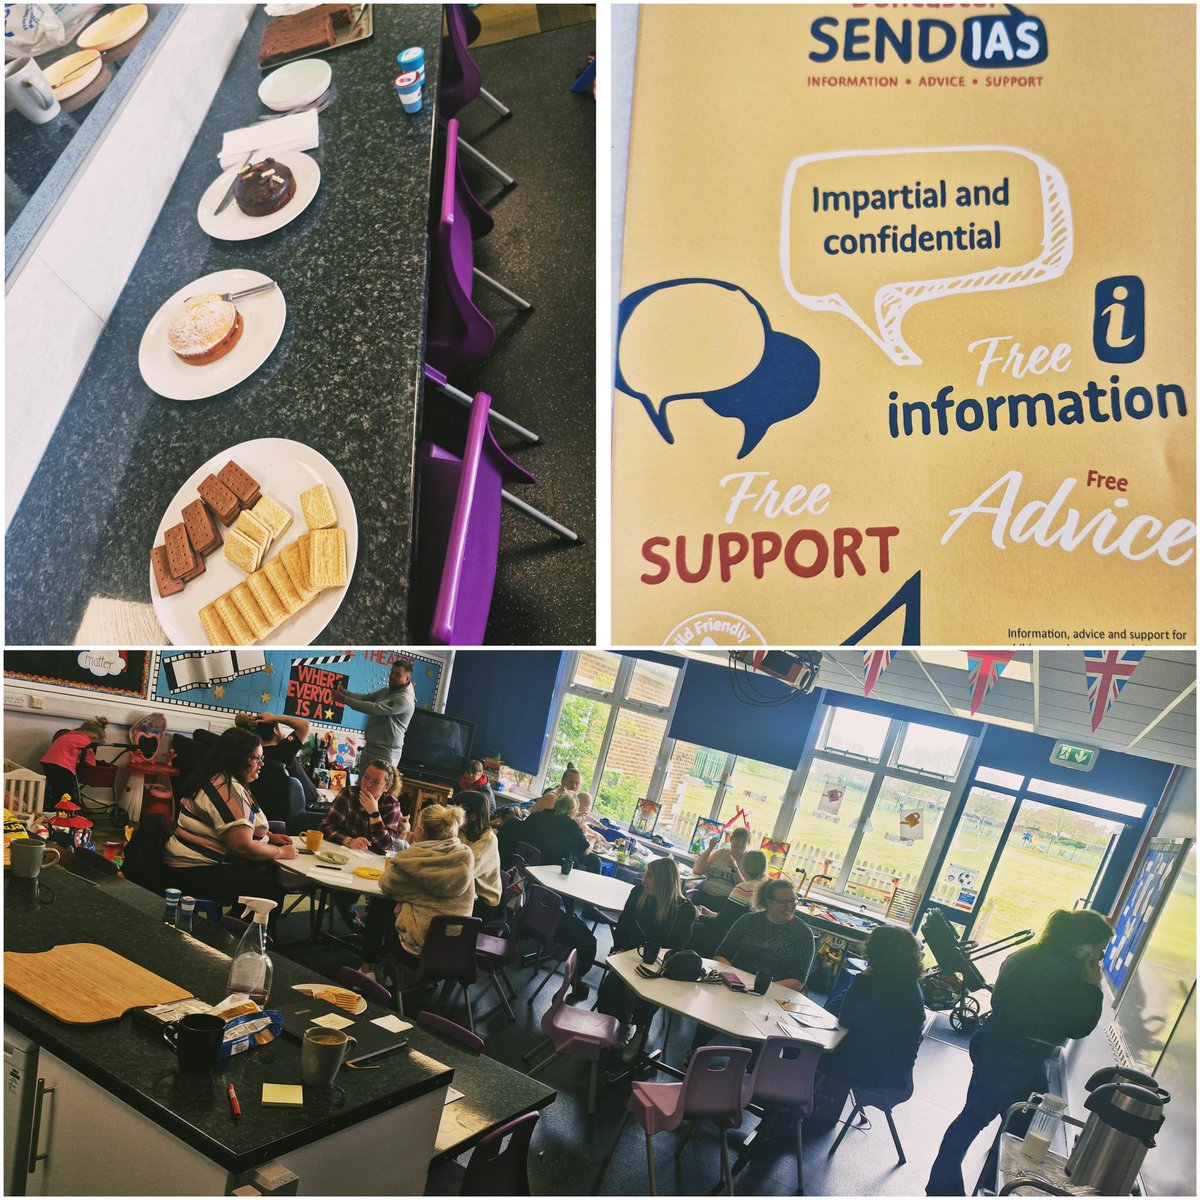 Fabulous CONNECT coffee morning here at Castle Hills. Big thanks to Naomi @ SENDIAS and Dan @Strongerfamilies for attending and sharing valuable information and answering questions. See you next time. @CastleHillsScaw @LegerEdTrust #TeamCastleHills